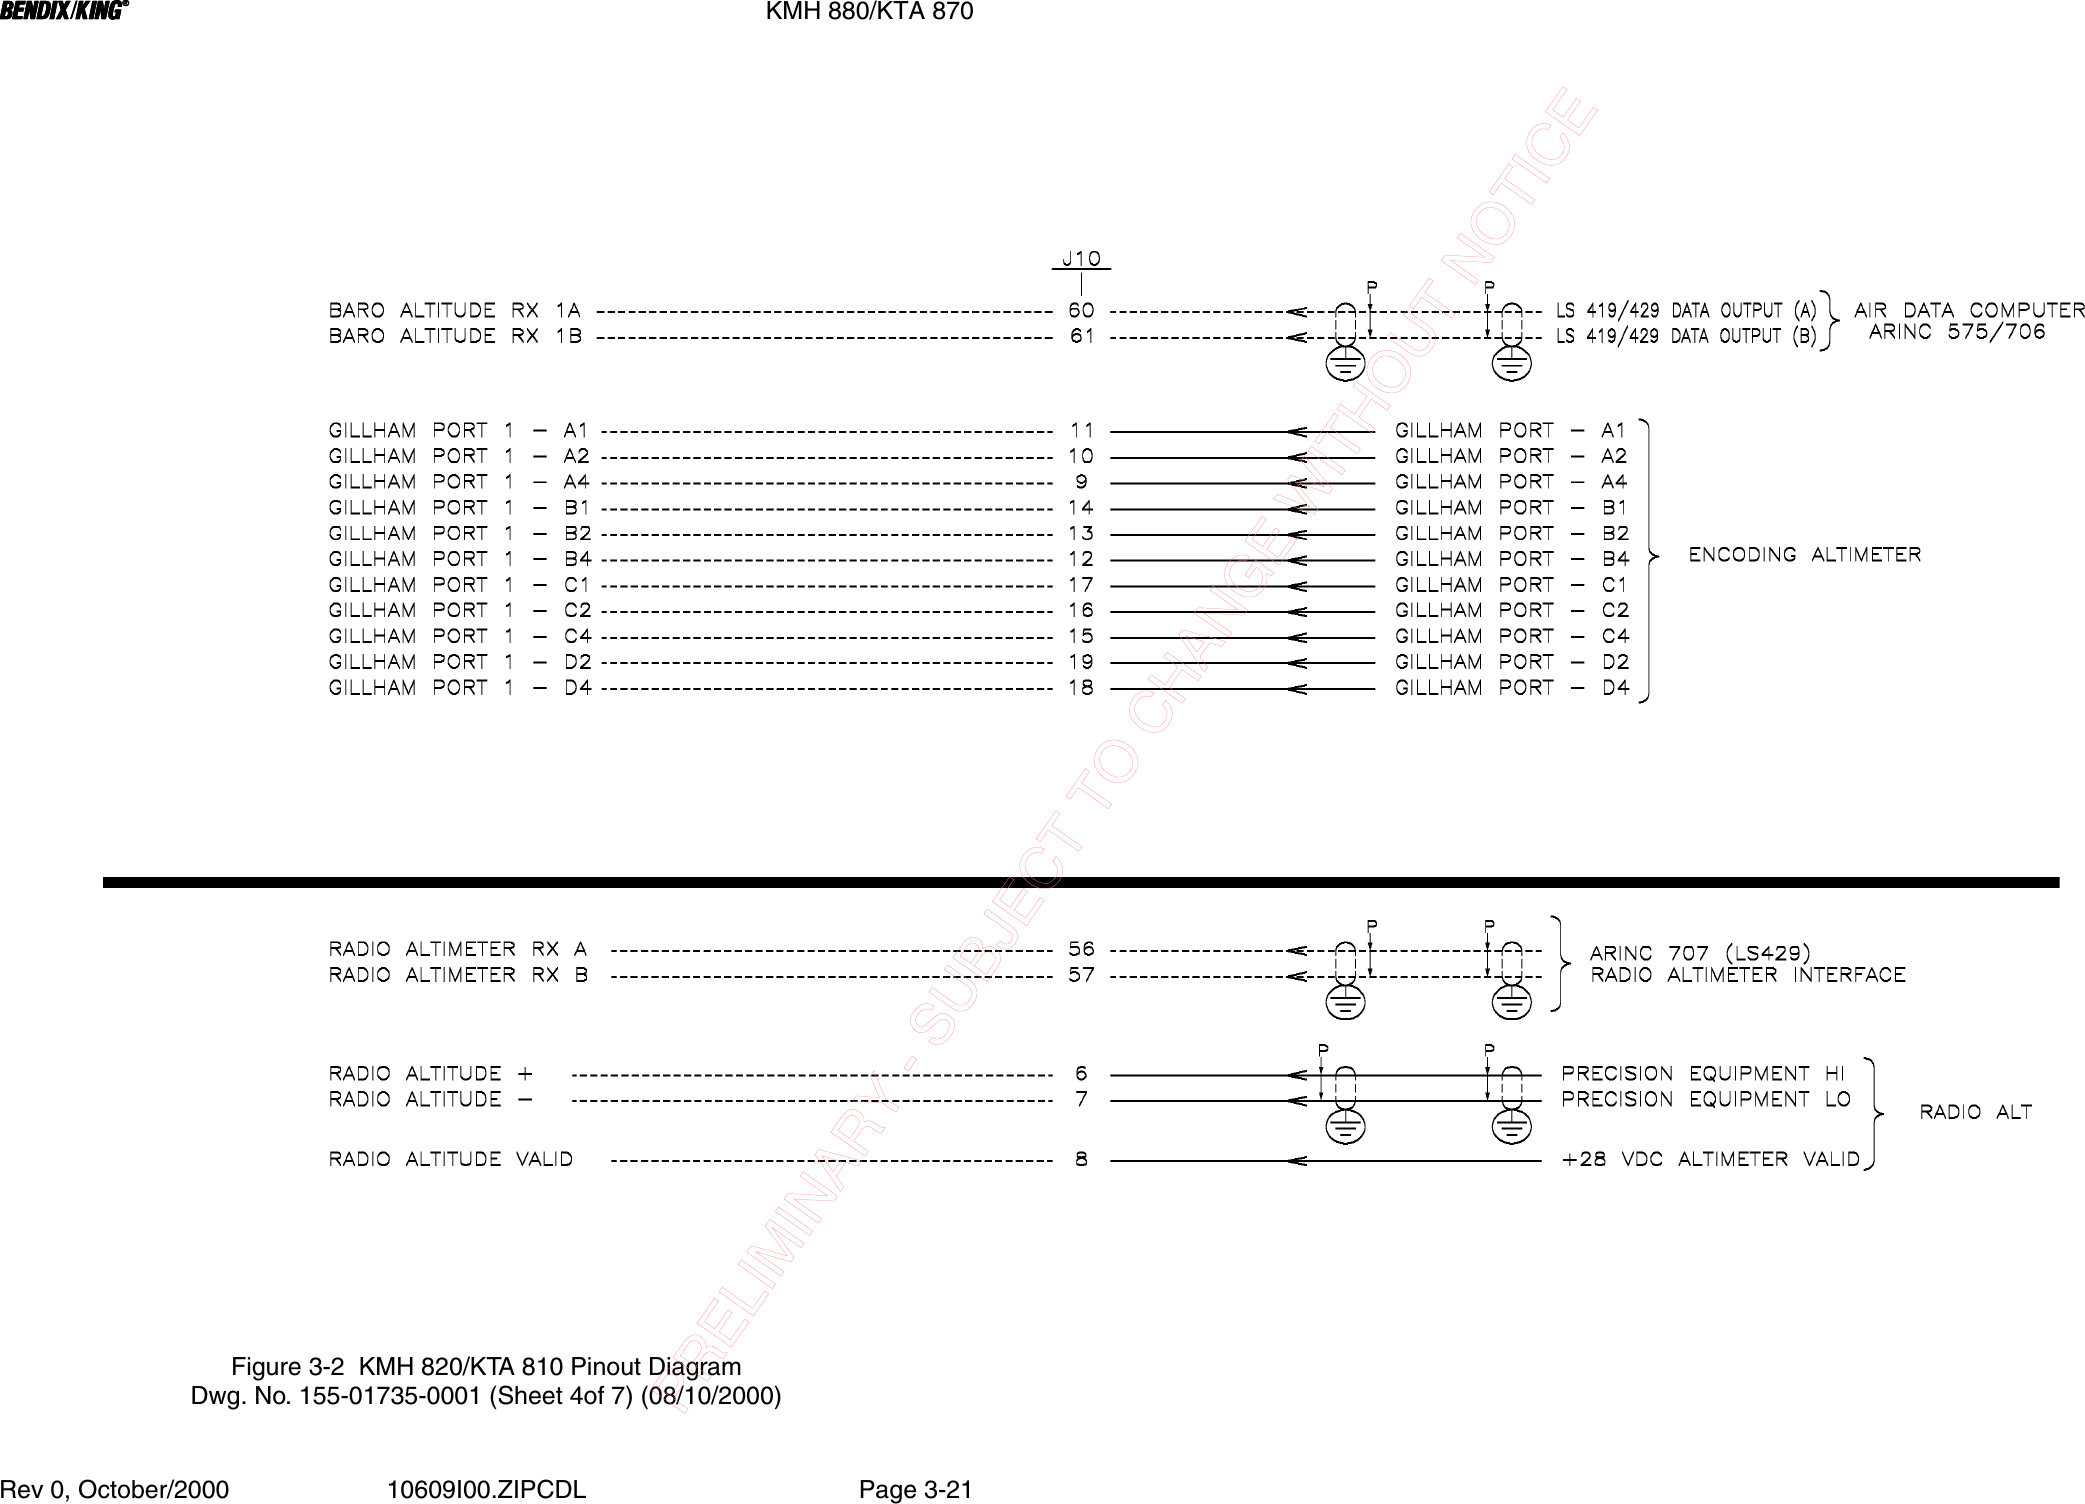 BBBBKMH 880/KTA 870Rev 0, October/2000 10609I00.ZIPCDL Page 3-21Figure 3-2  KMH 820/KTA 810 Pinout DiagramDwg. No. 155-01735-0001 (Sheet 4of 7) (08/10/2000)PRELIMINARY - SUBJECT TO CHANGE WITHOUT NOTICE